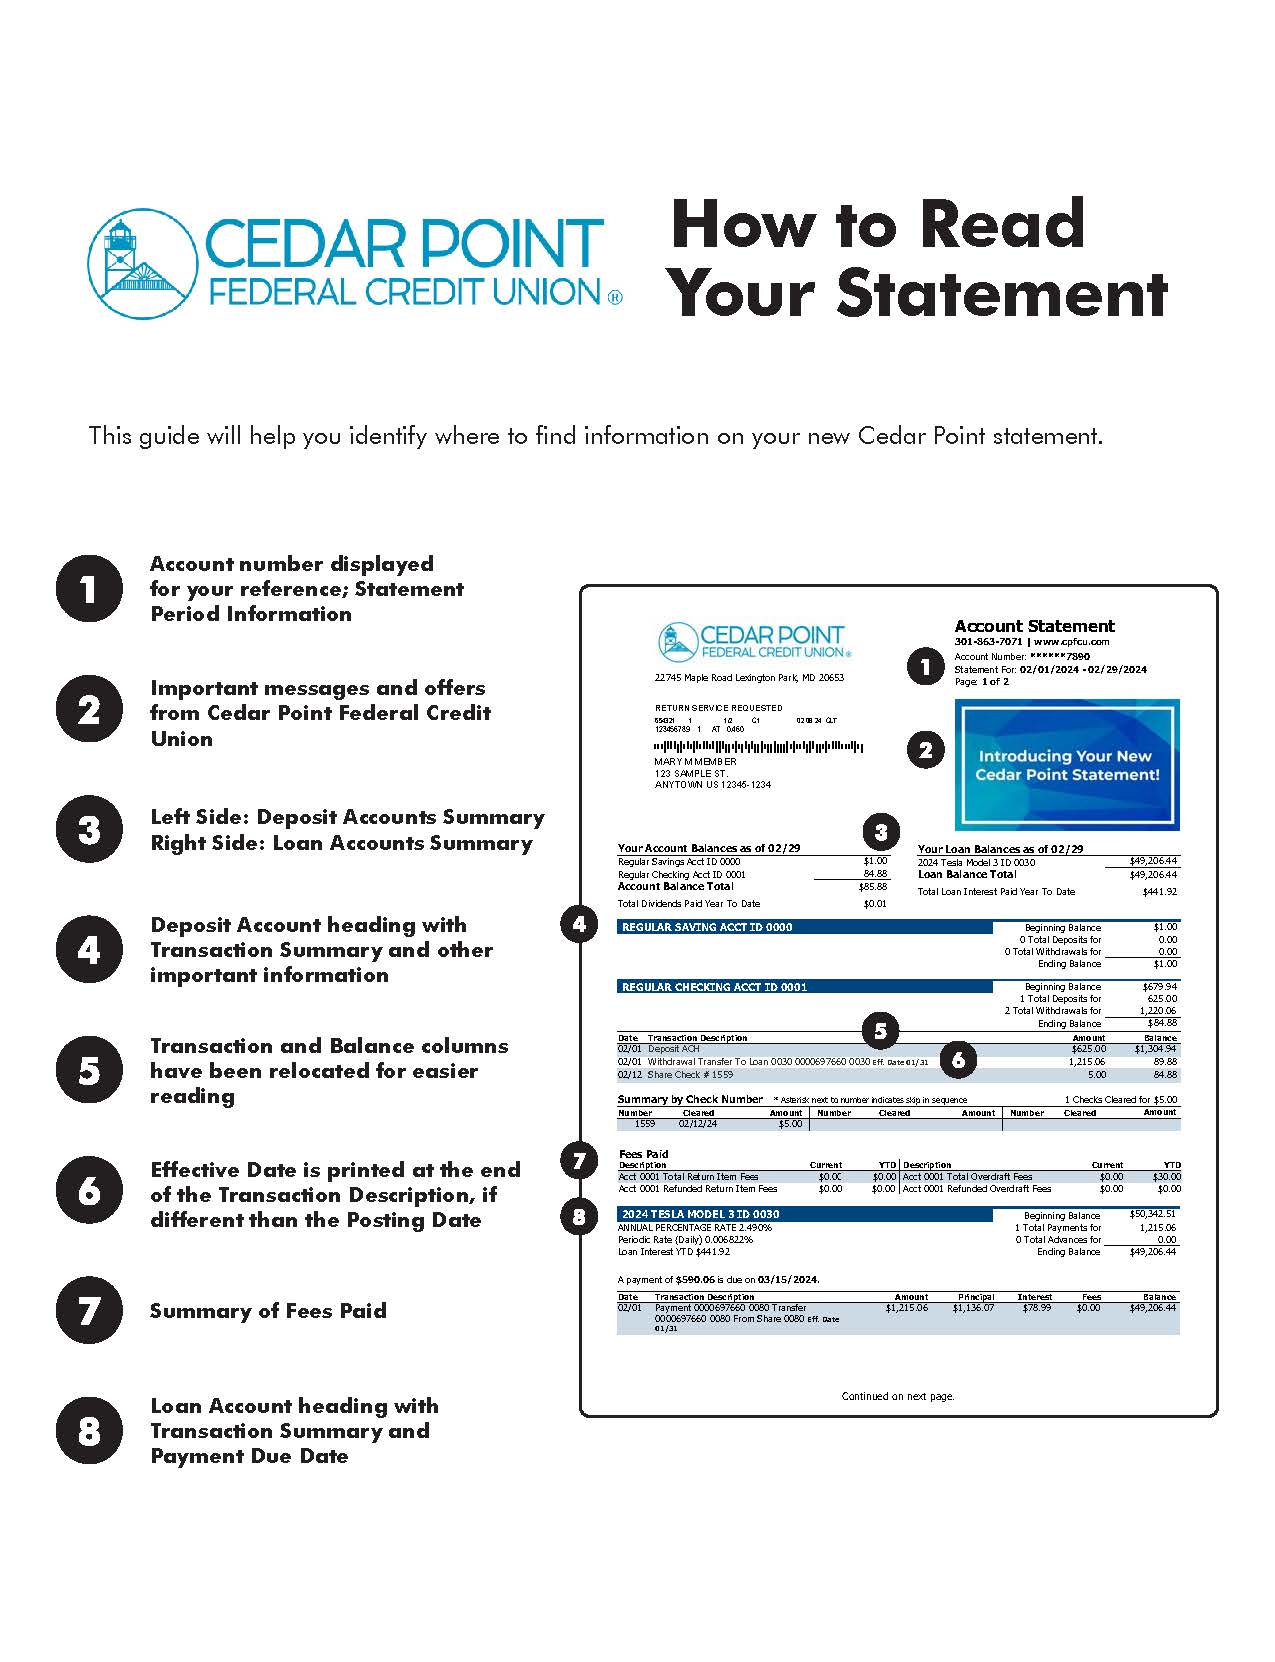 How to read your statement